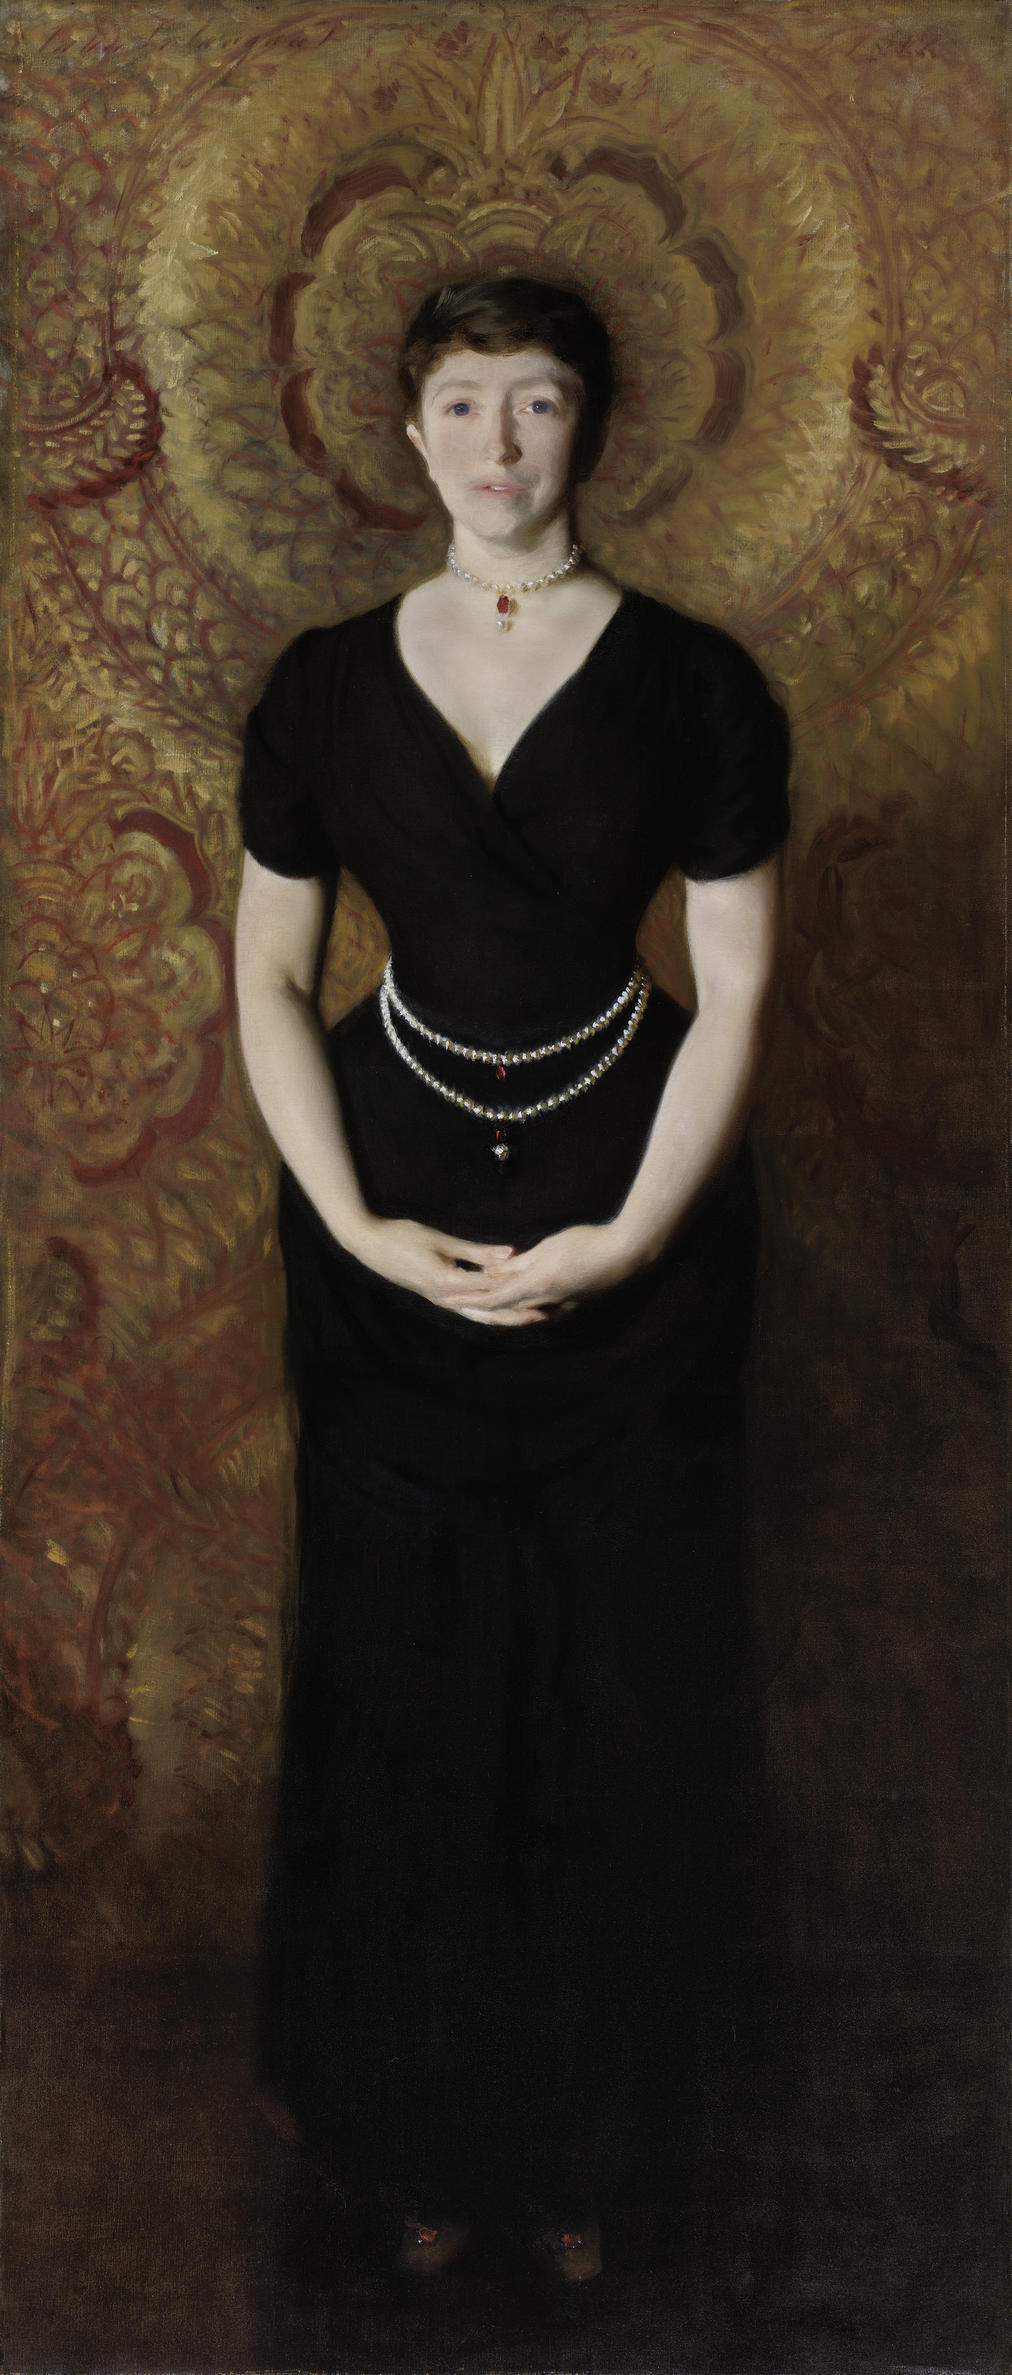 John Singer Sargent’s portrait of Isabella Stewart Gardner. A woman with light skin, brown hair, and blue eyes stands with her hands clasped in front of her. She wears a black dress with pearls and rubies around her neck and waist.